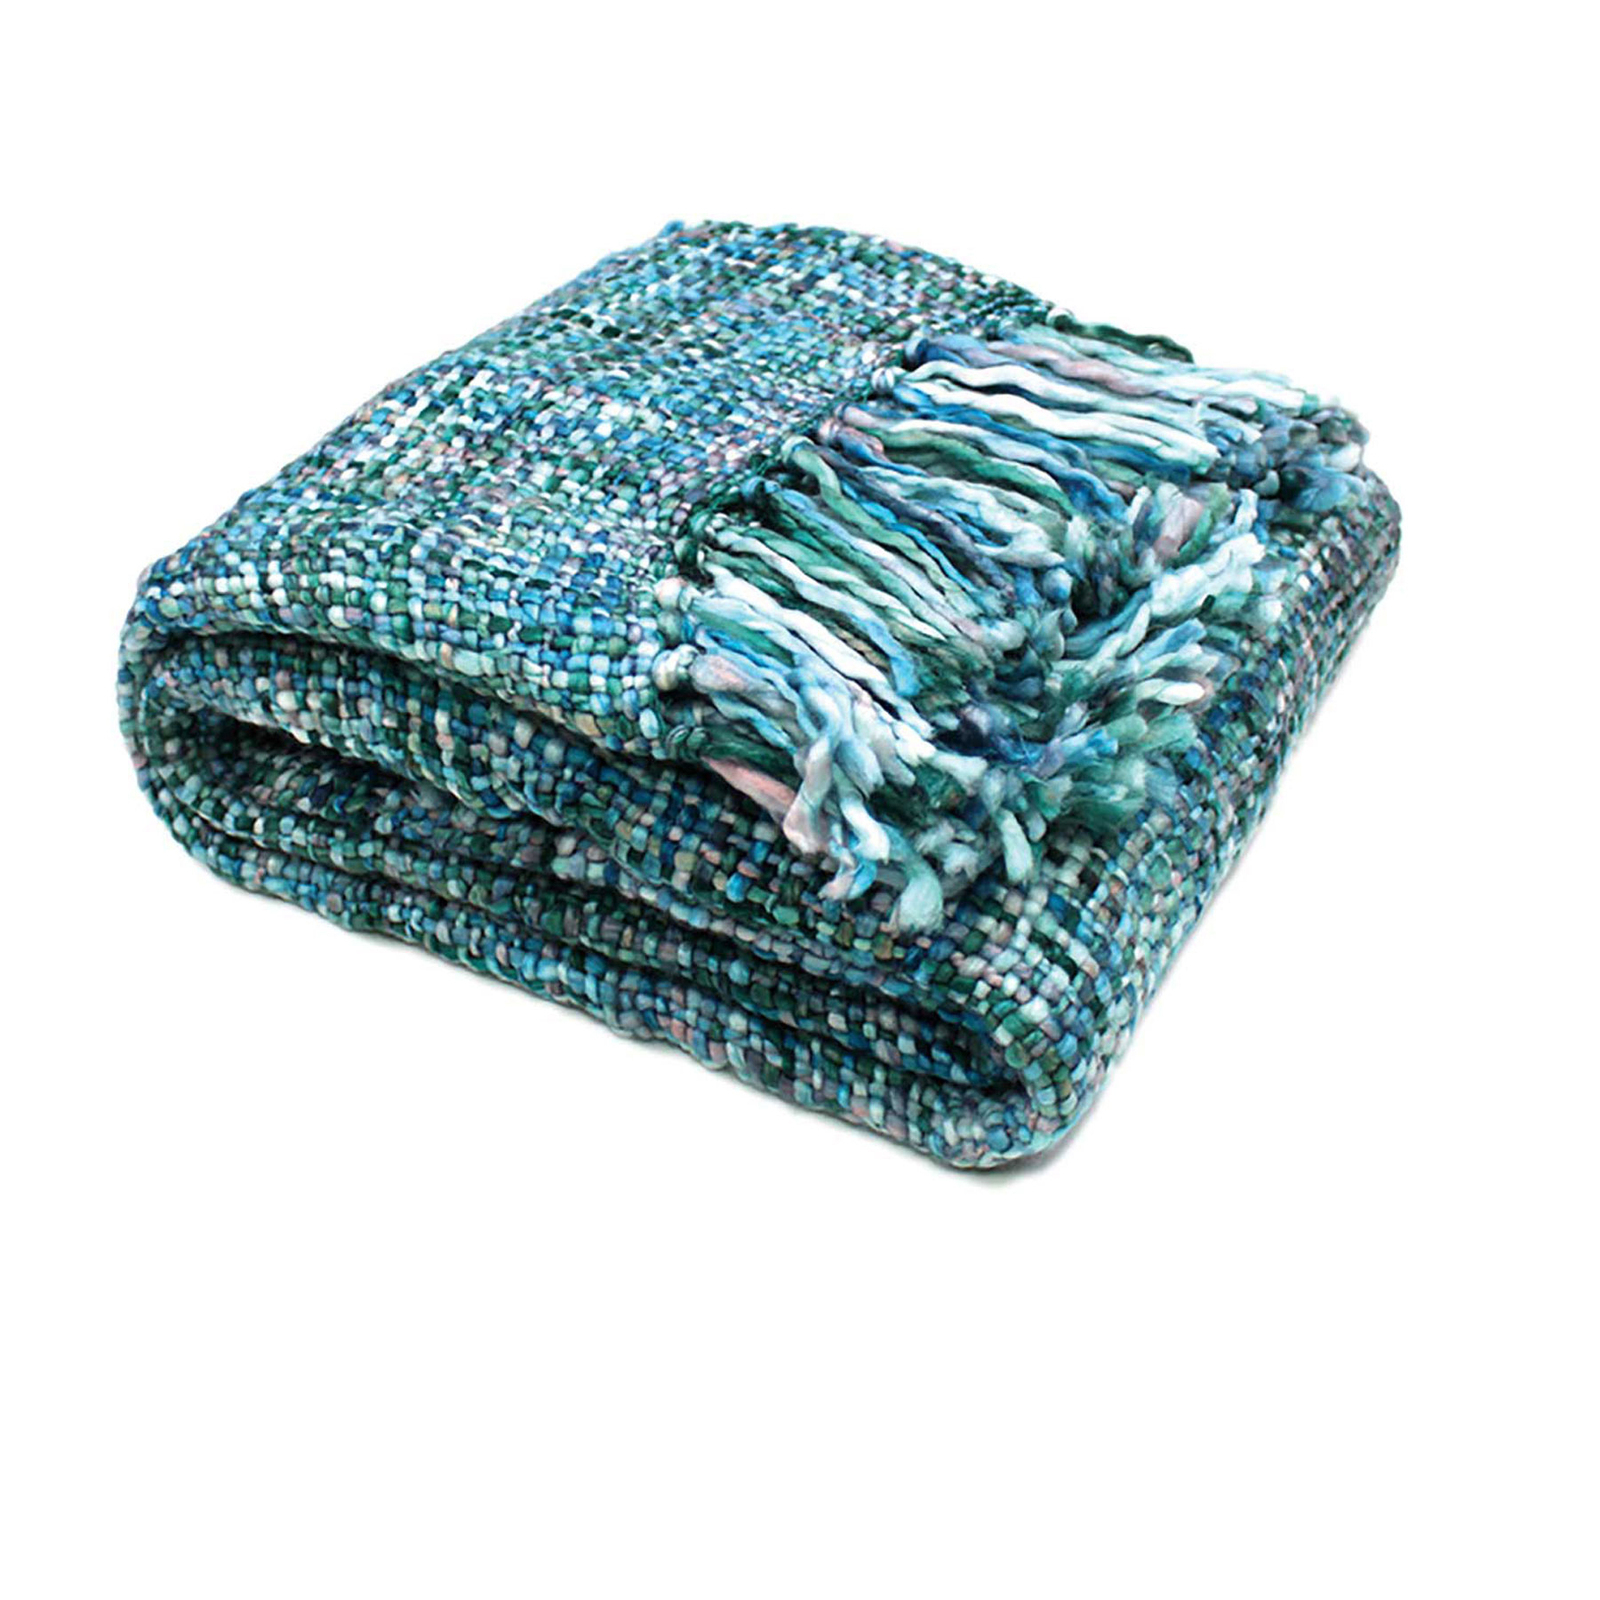 Rans Oslo Knitted Weave Throw 127x152cm Price